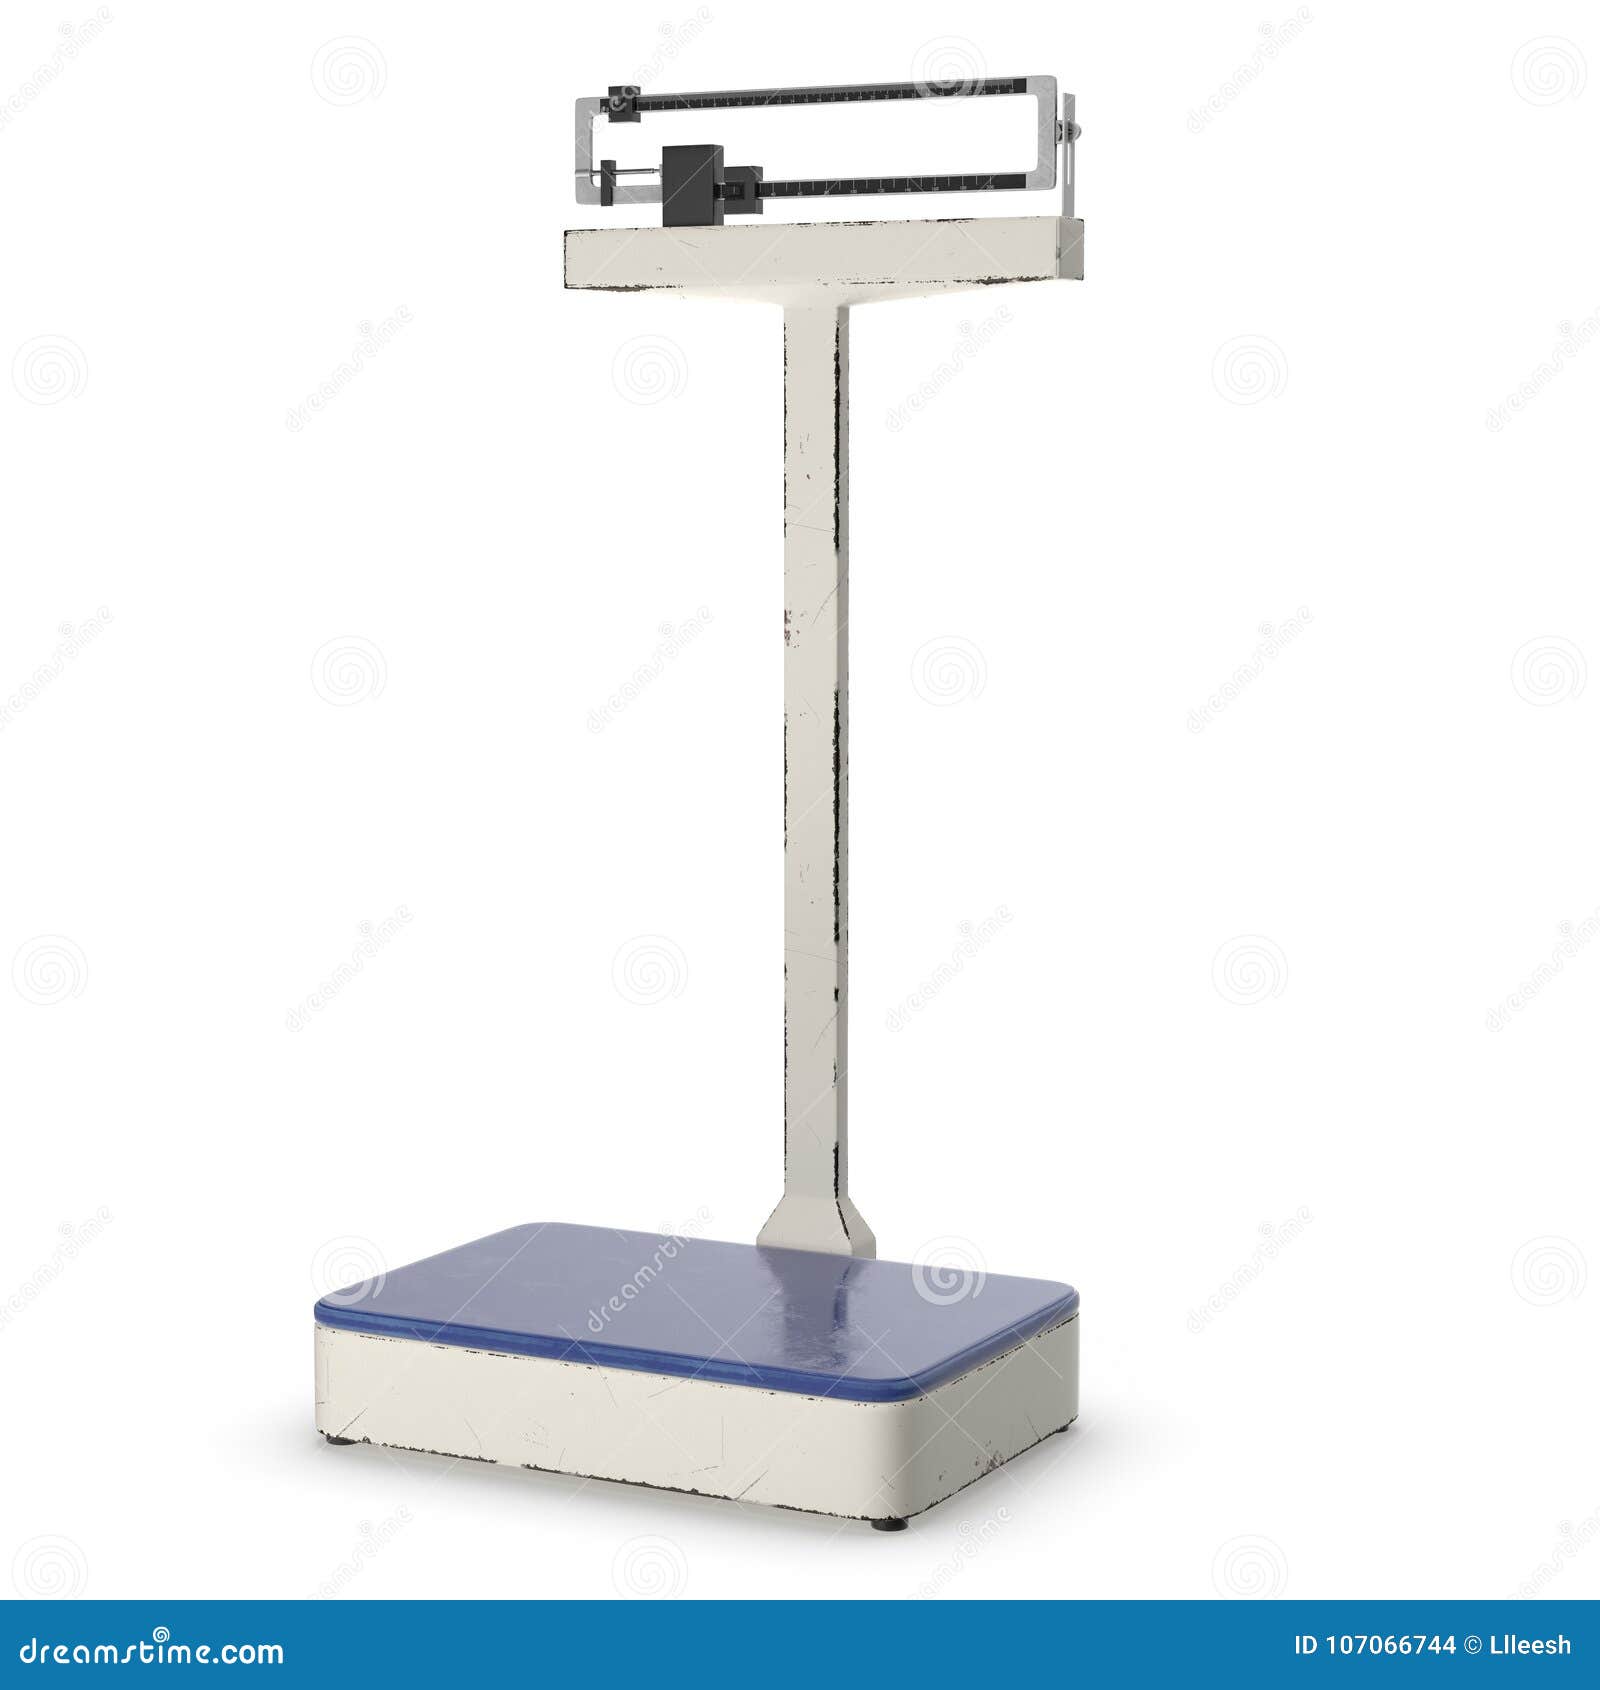 https://thumbs.dreamstime.com/z/ancient-mechanical-medical-floor-scales-human-weighing-ancient-mechanical-medical-floor-scales-human-weighing-image-107066744.jpg